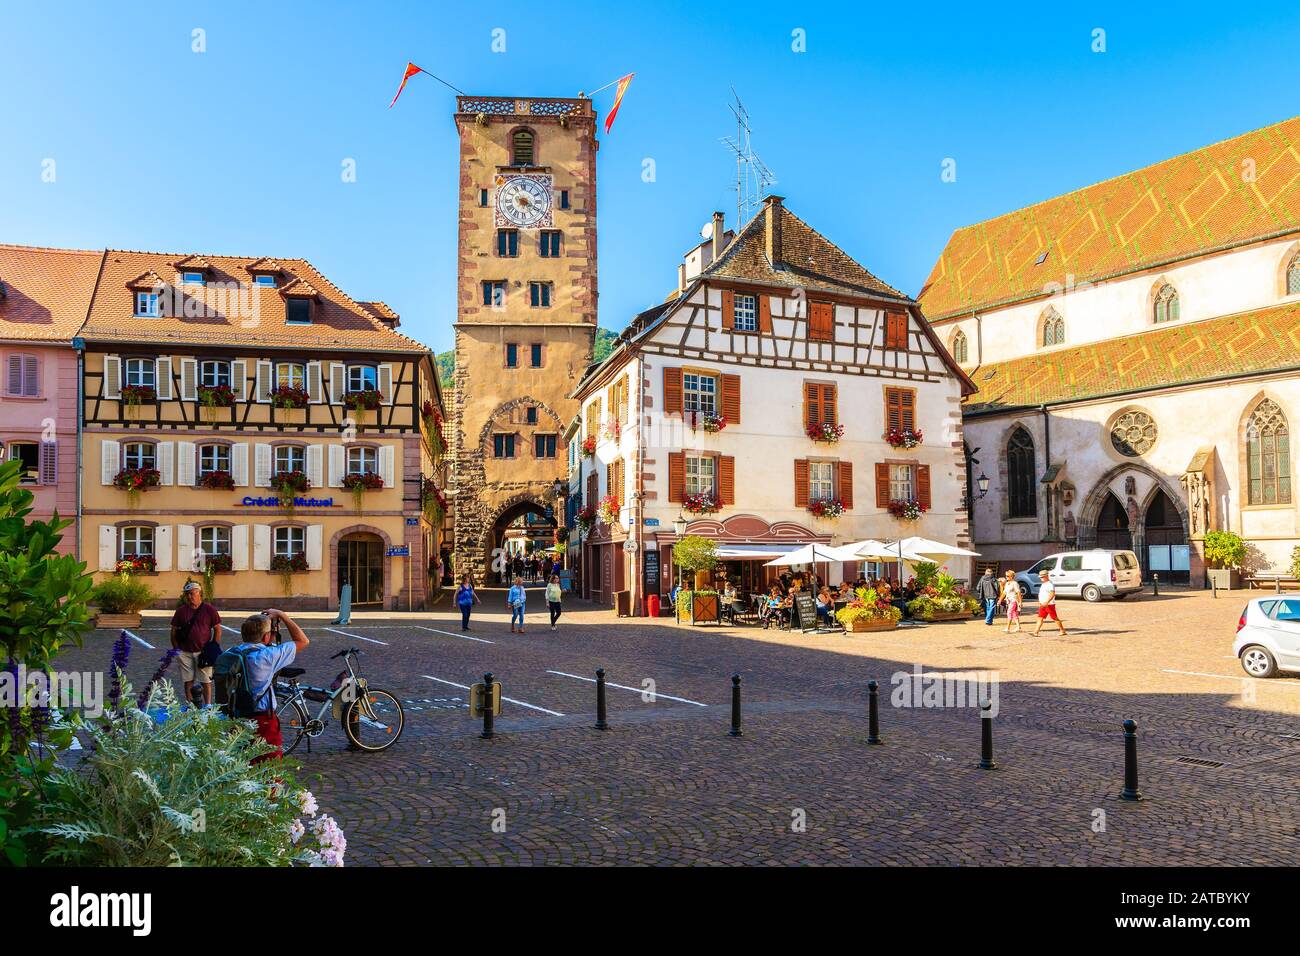 ALSACE WINE REGION, FRANCE - SEP 20, 2019: Town square and colorful houses in Ribeauville which is famous place located on Alsatian Wine Route, France Stock Photo